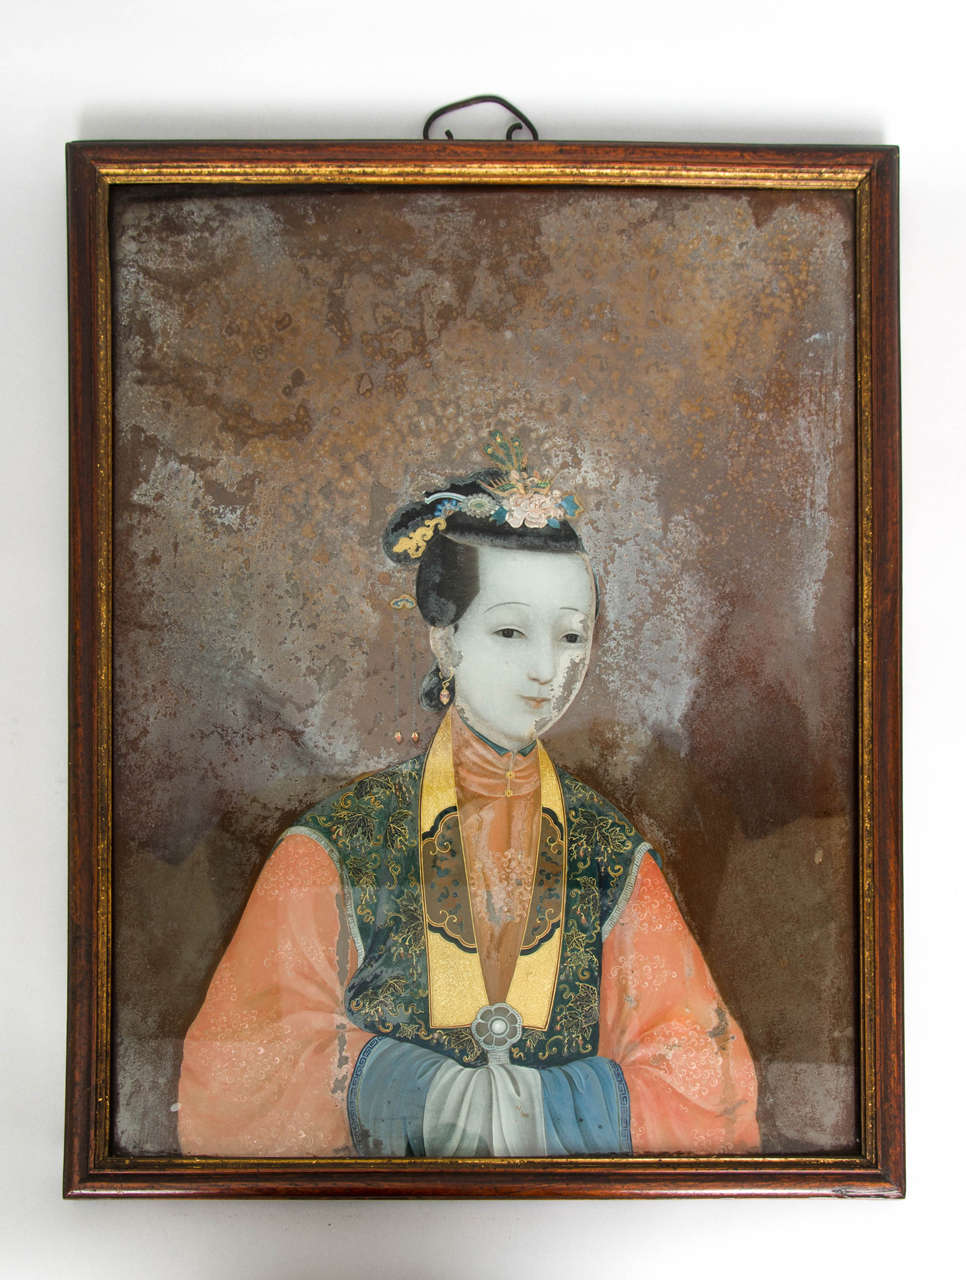 A pair of large Chinese Export reverse glass portrait pictures, one panel depicting a woman of rank, the other her husband, probably a dignitary in their original frames. Their scale is unusually large and are exceptionally fine. The pictures retain